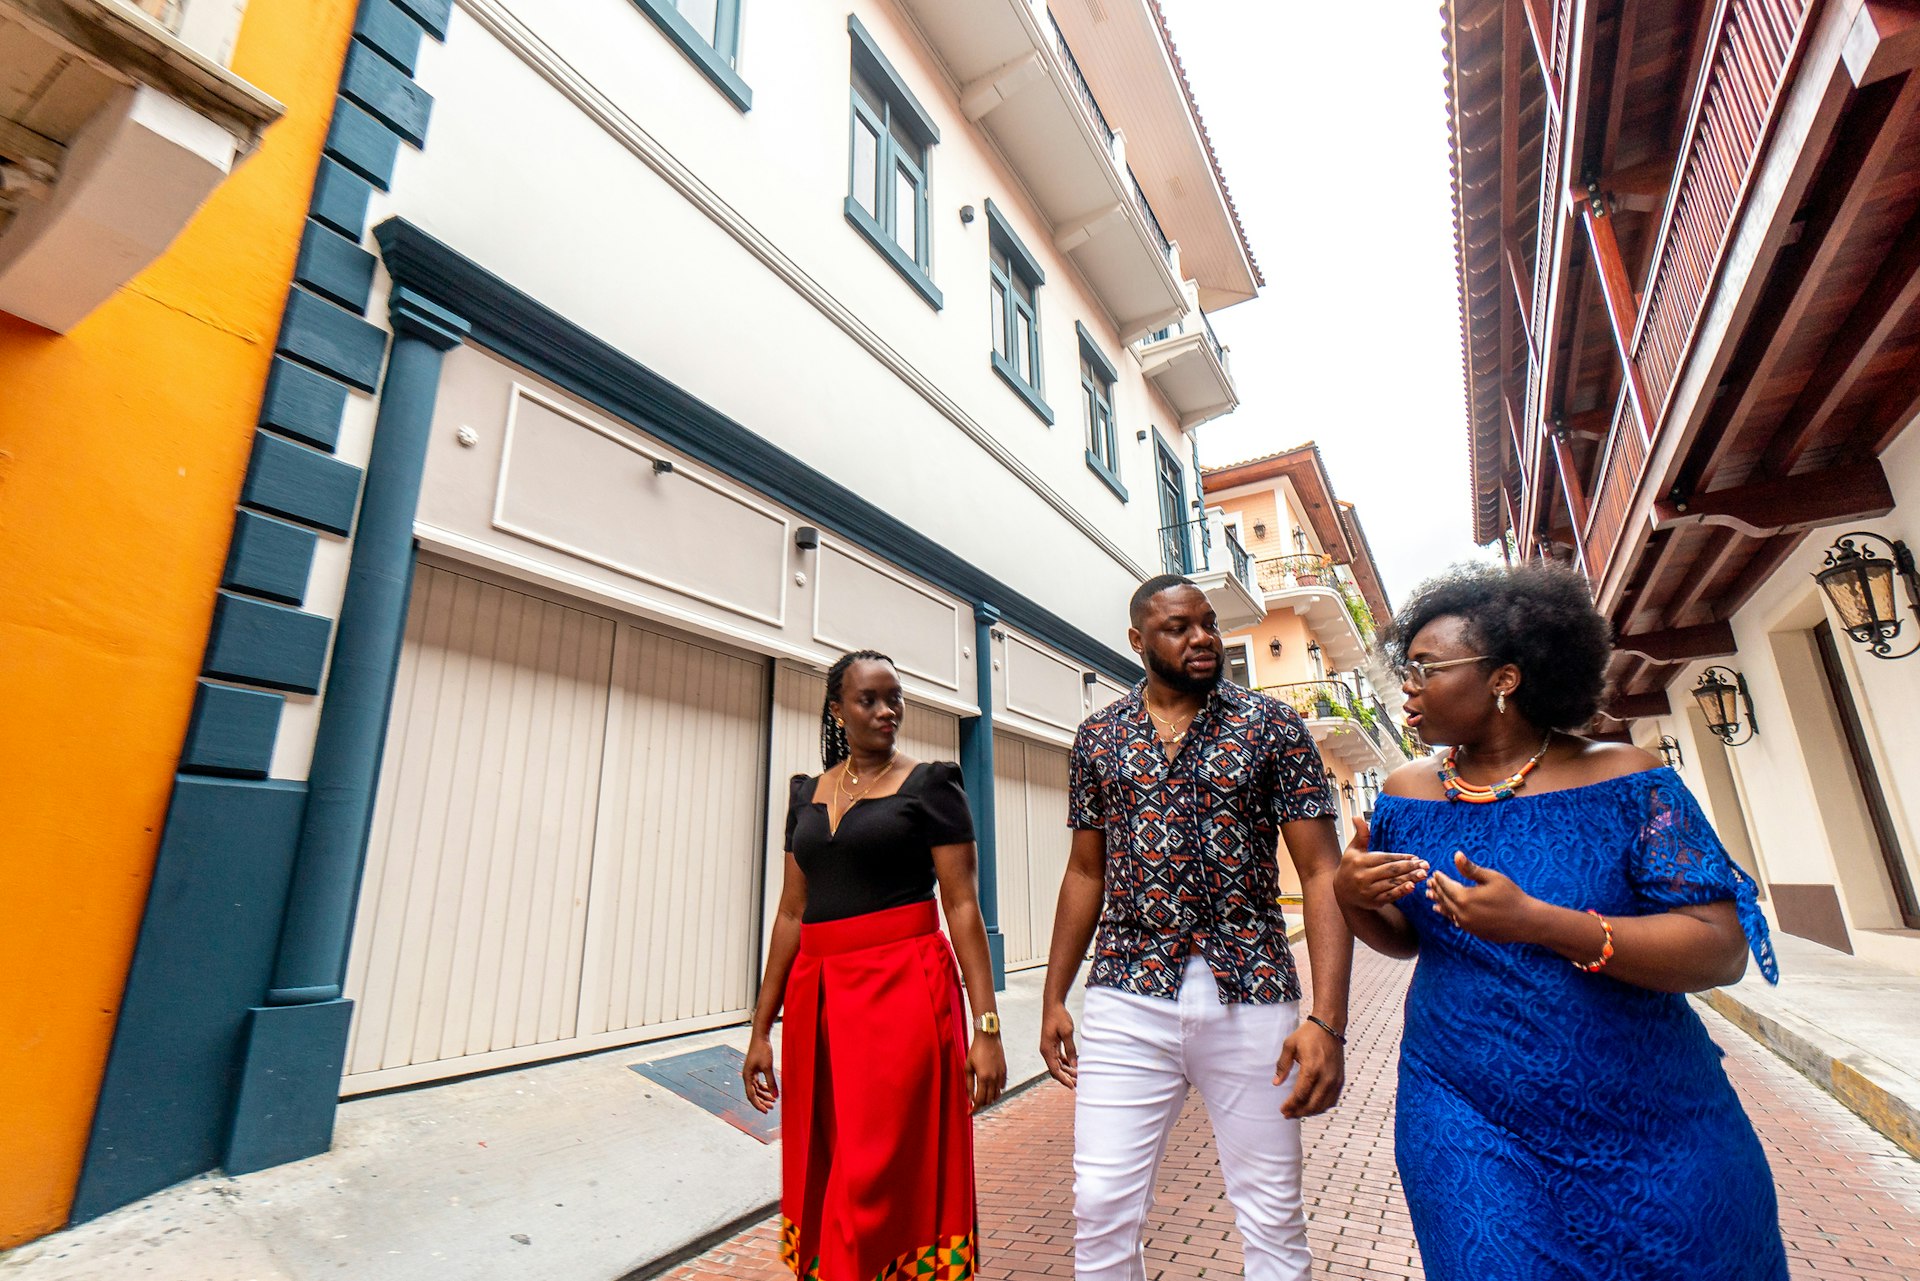 Wide Angle Image of Fashionable Afro-Descendant Black Woman Giving a Walking Tour to a Well-Dressed Couple in the Streets of the Huerta Sandoval Neighborhood of Panama City,